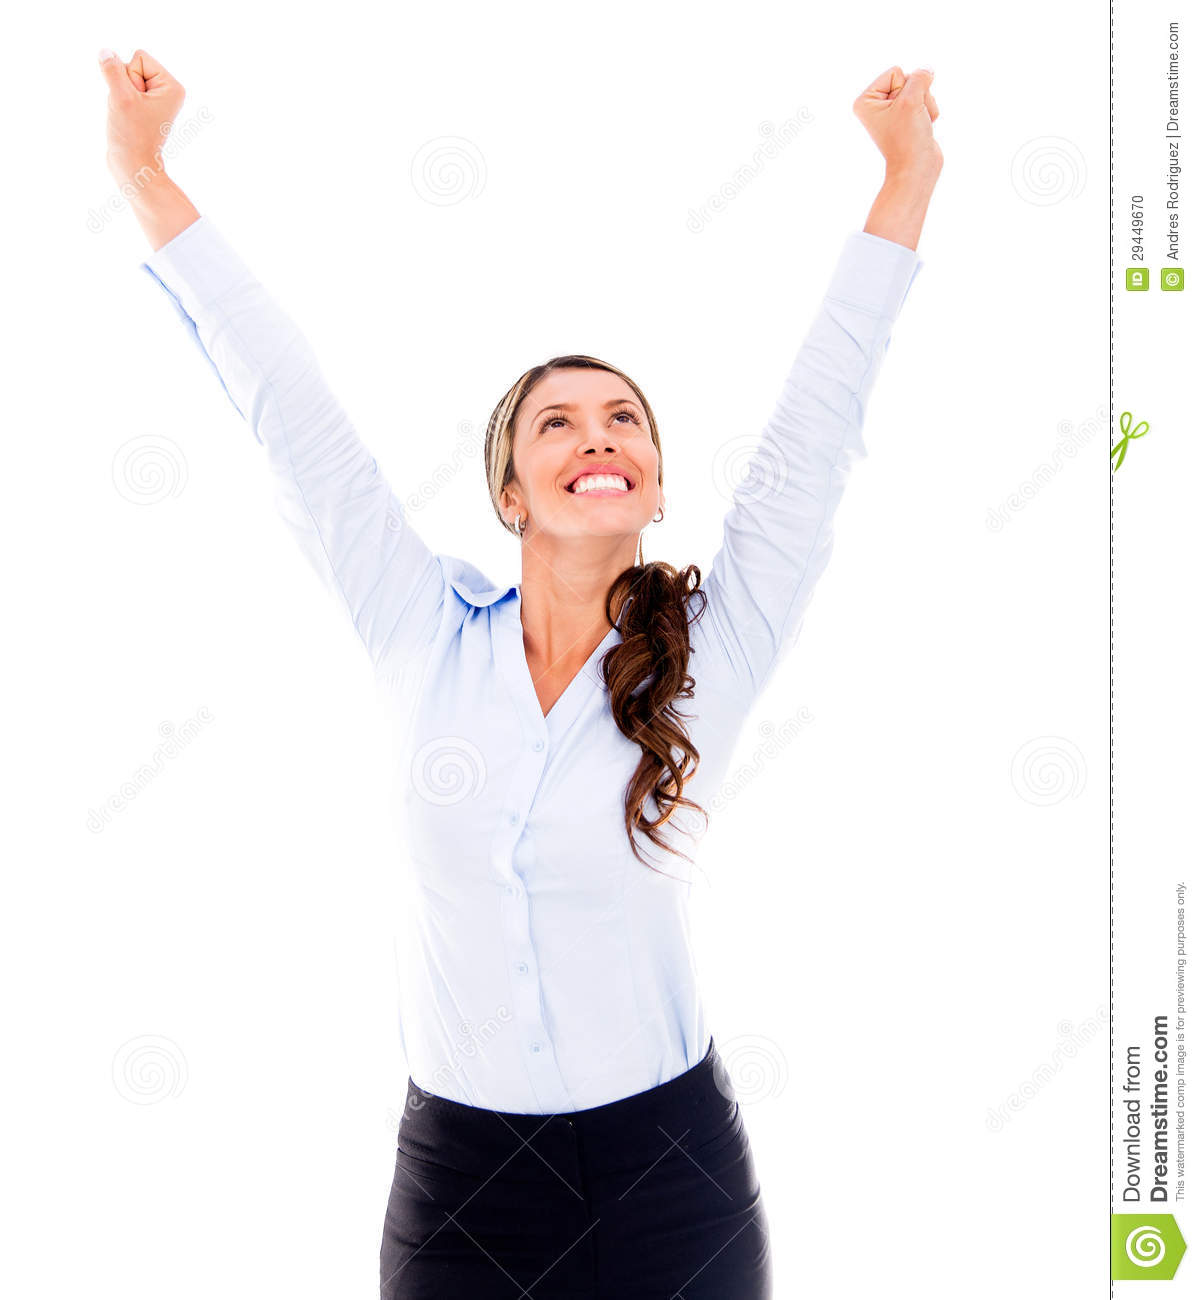 Excited Business Woman With Arms Up Celebrating   Isolated Over A